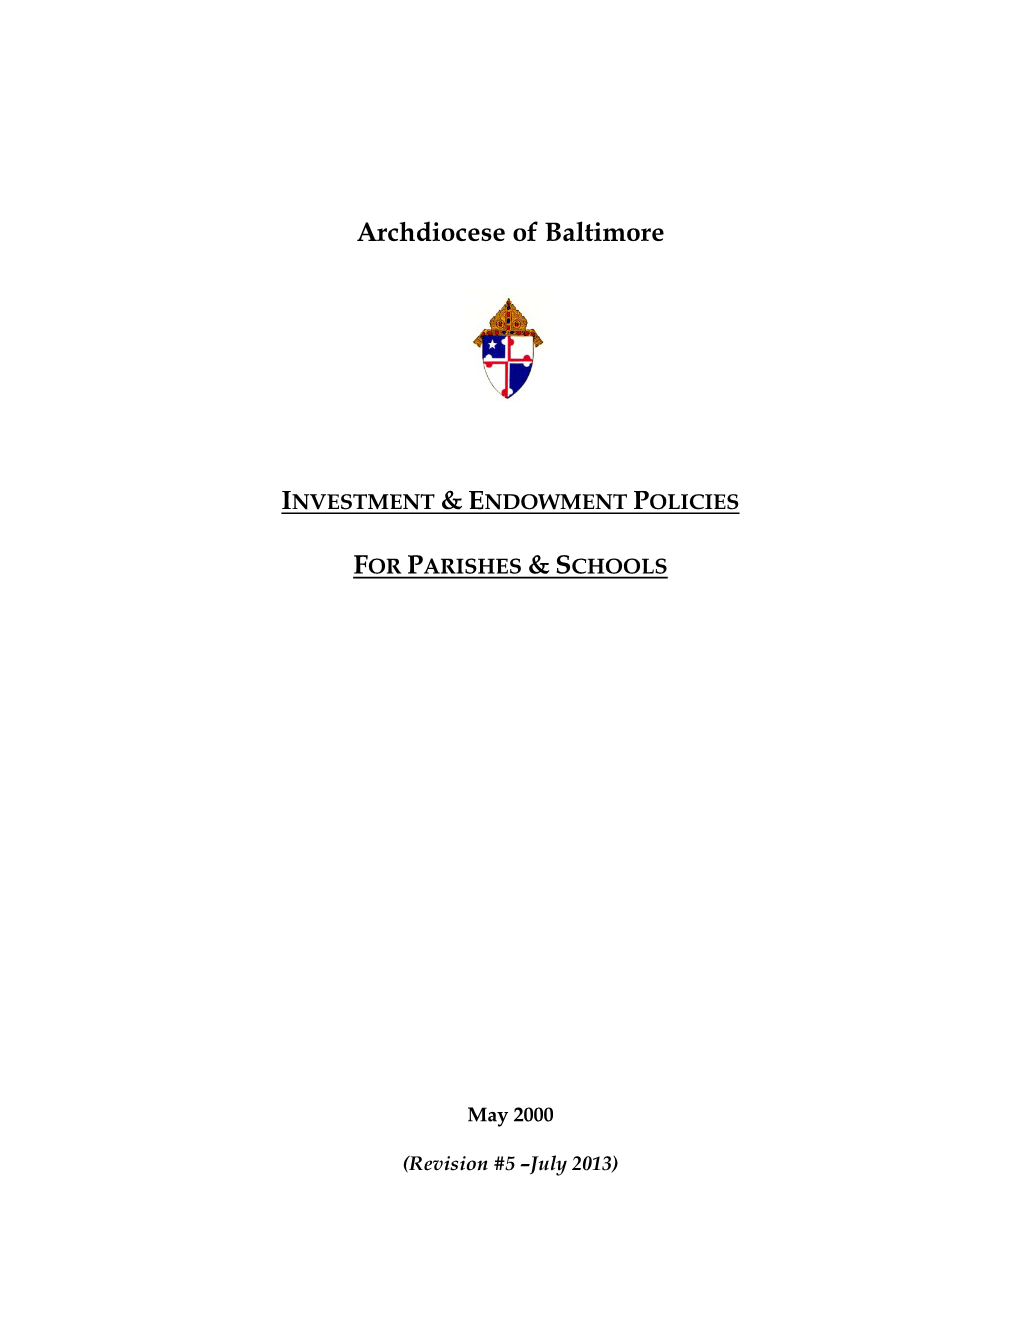 Archdiocesan Investment Policies and Options